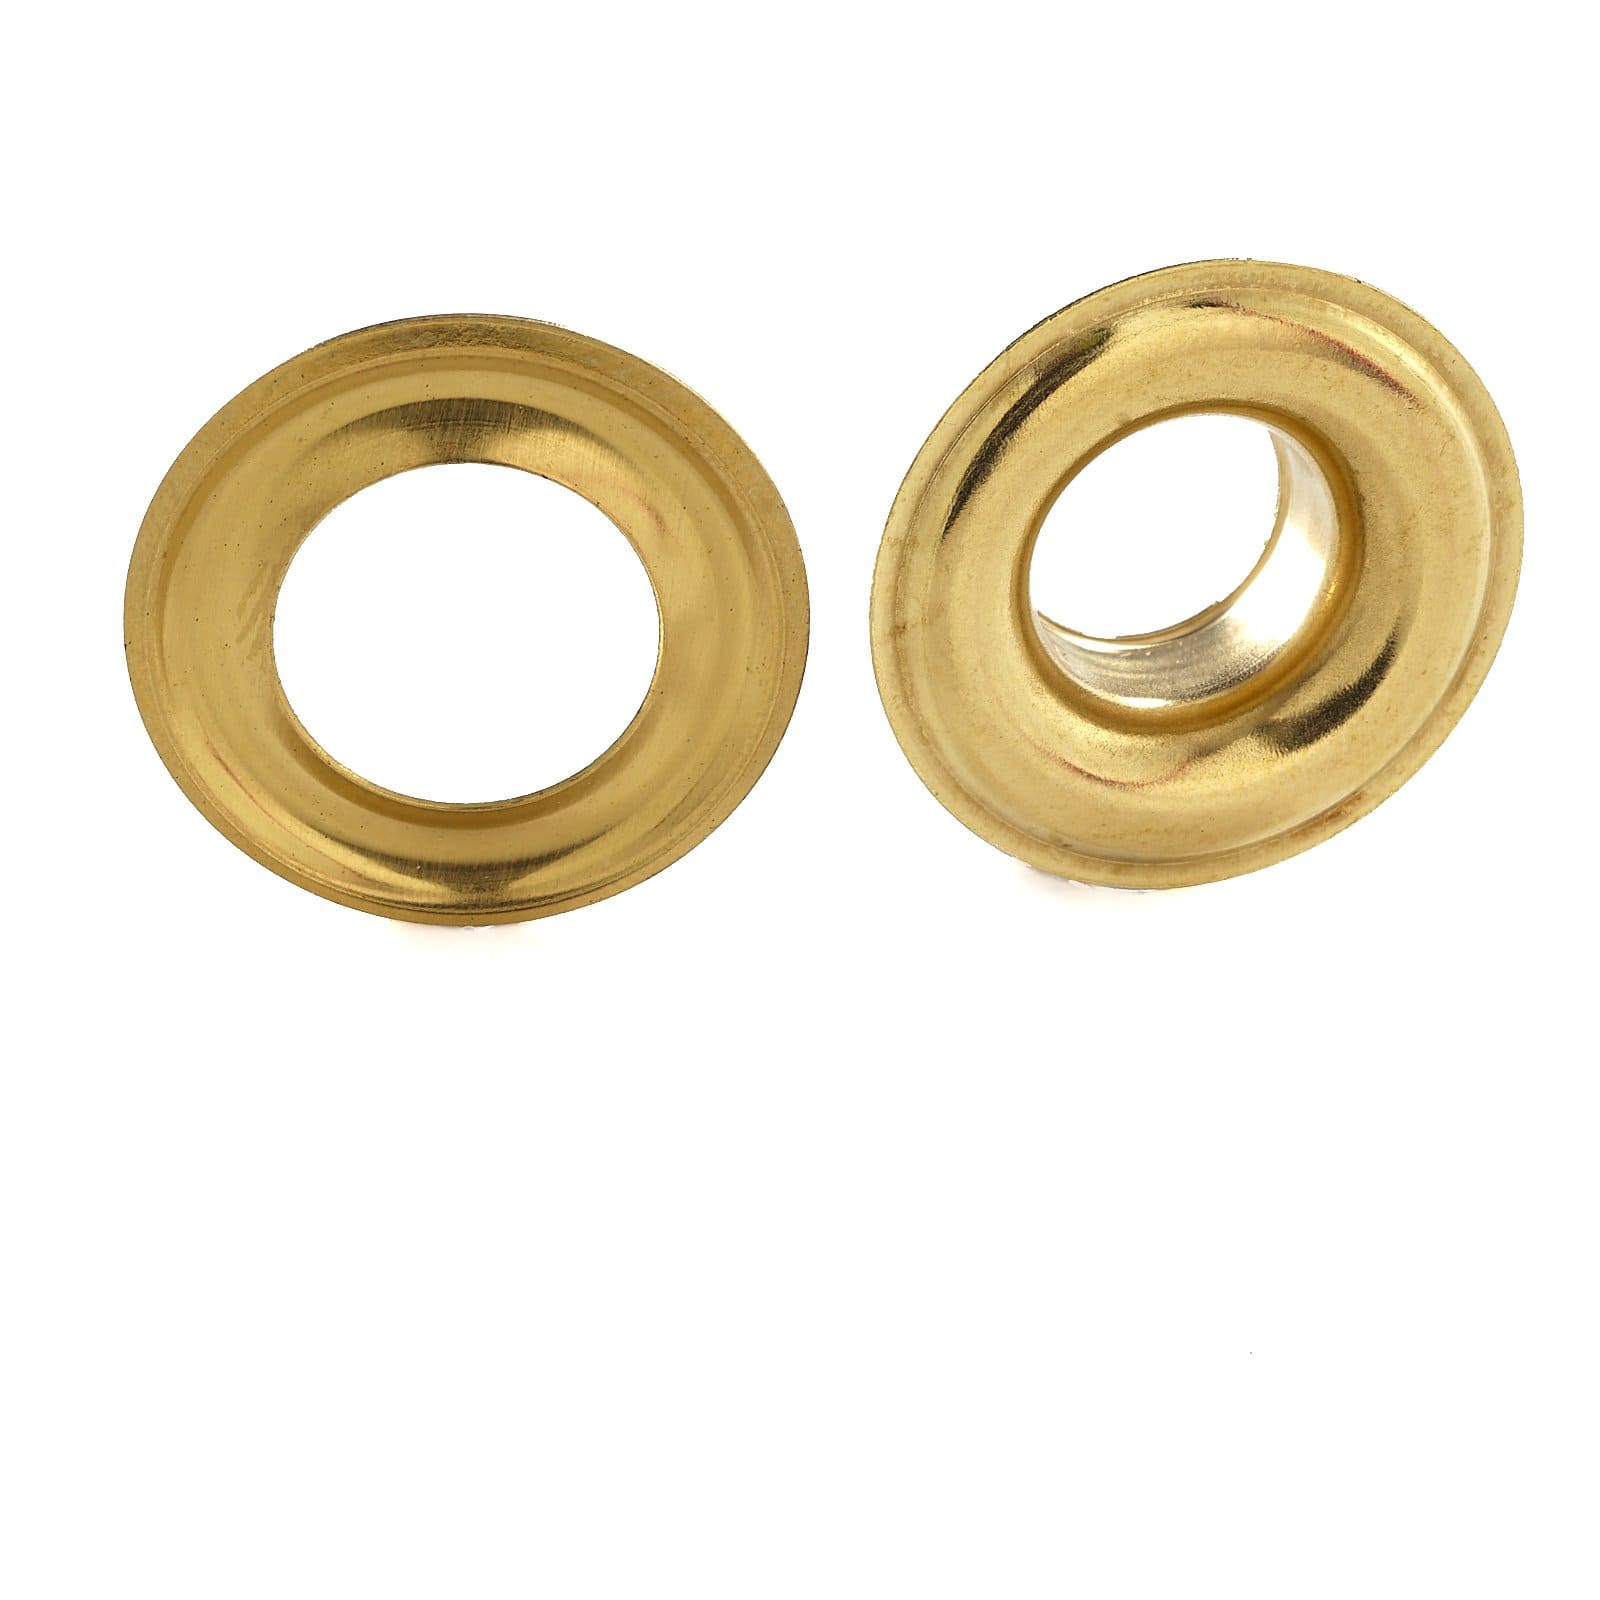 Ohio Travel Bag Fasteners #3 Brass, Grommet with Washer, Solid Brass, #GROM-3-SB GROM-3-SB